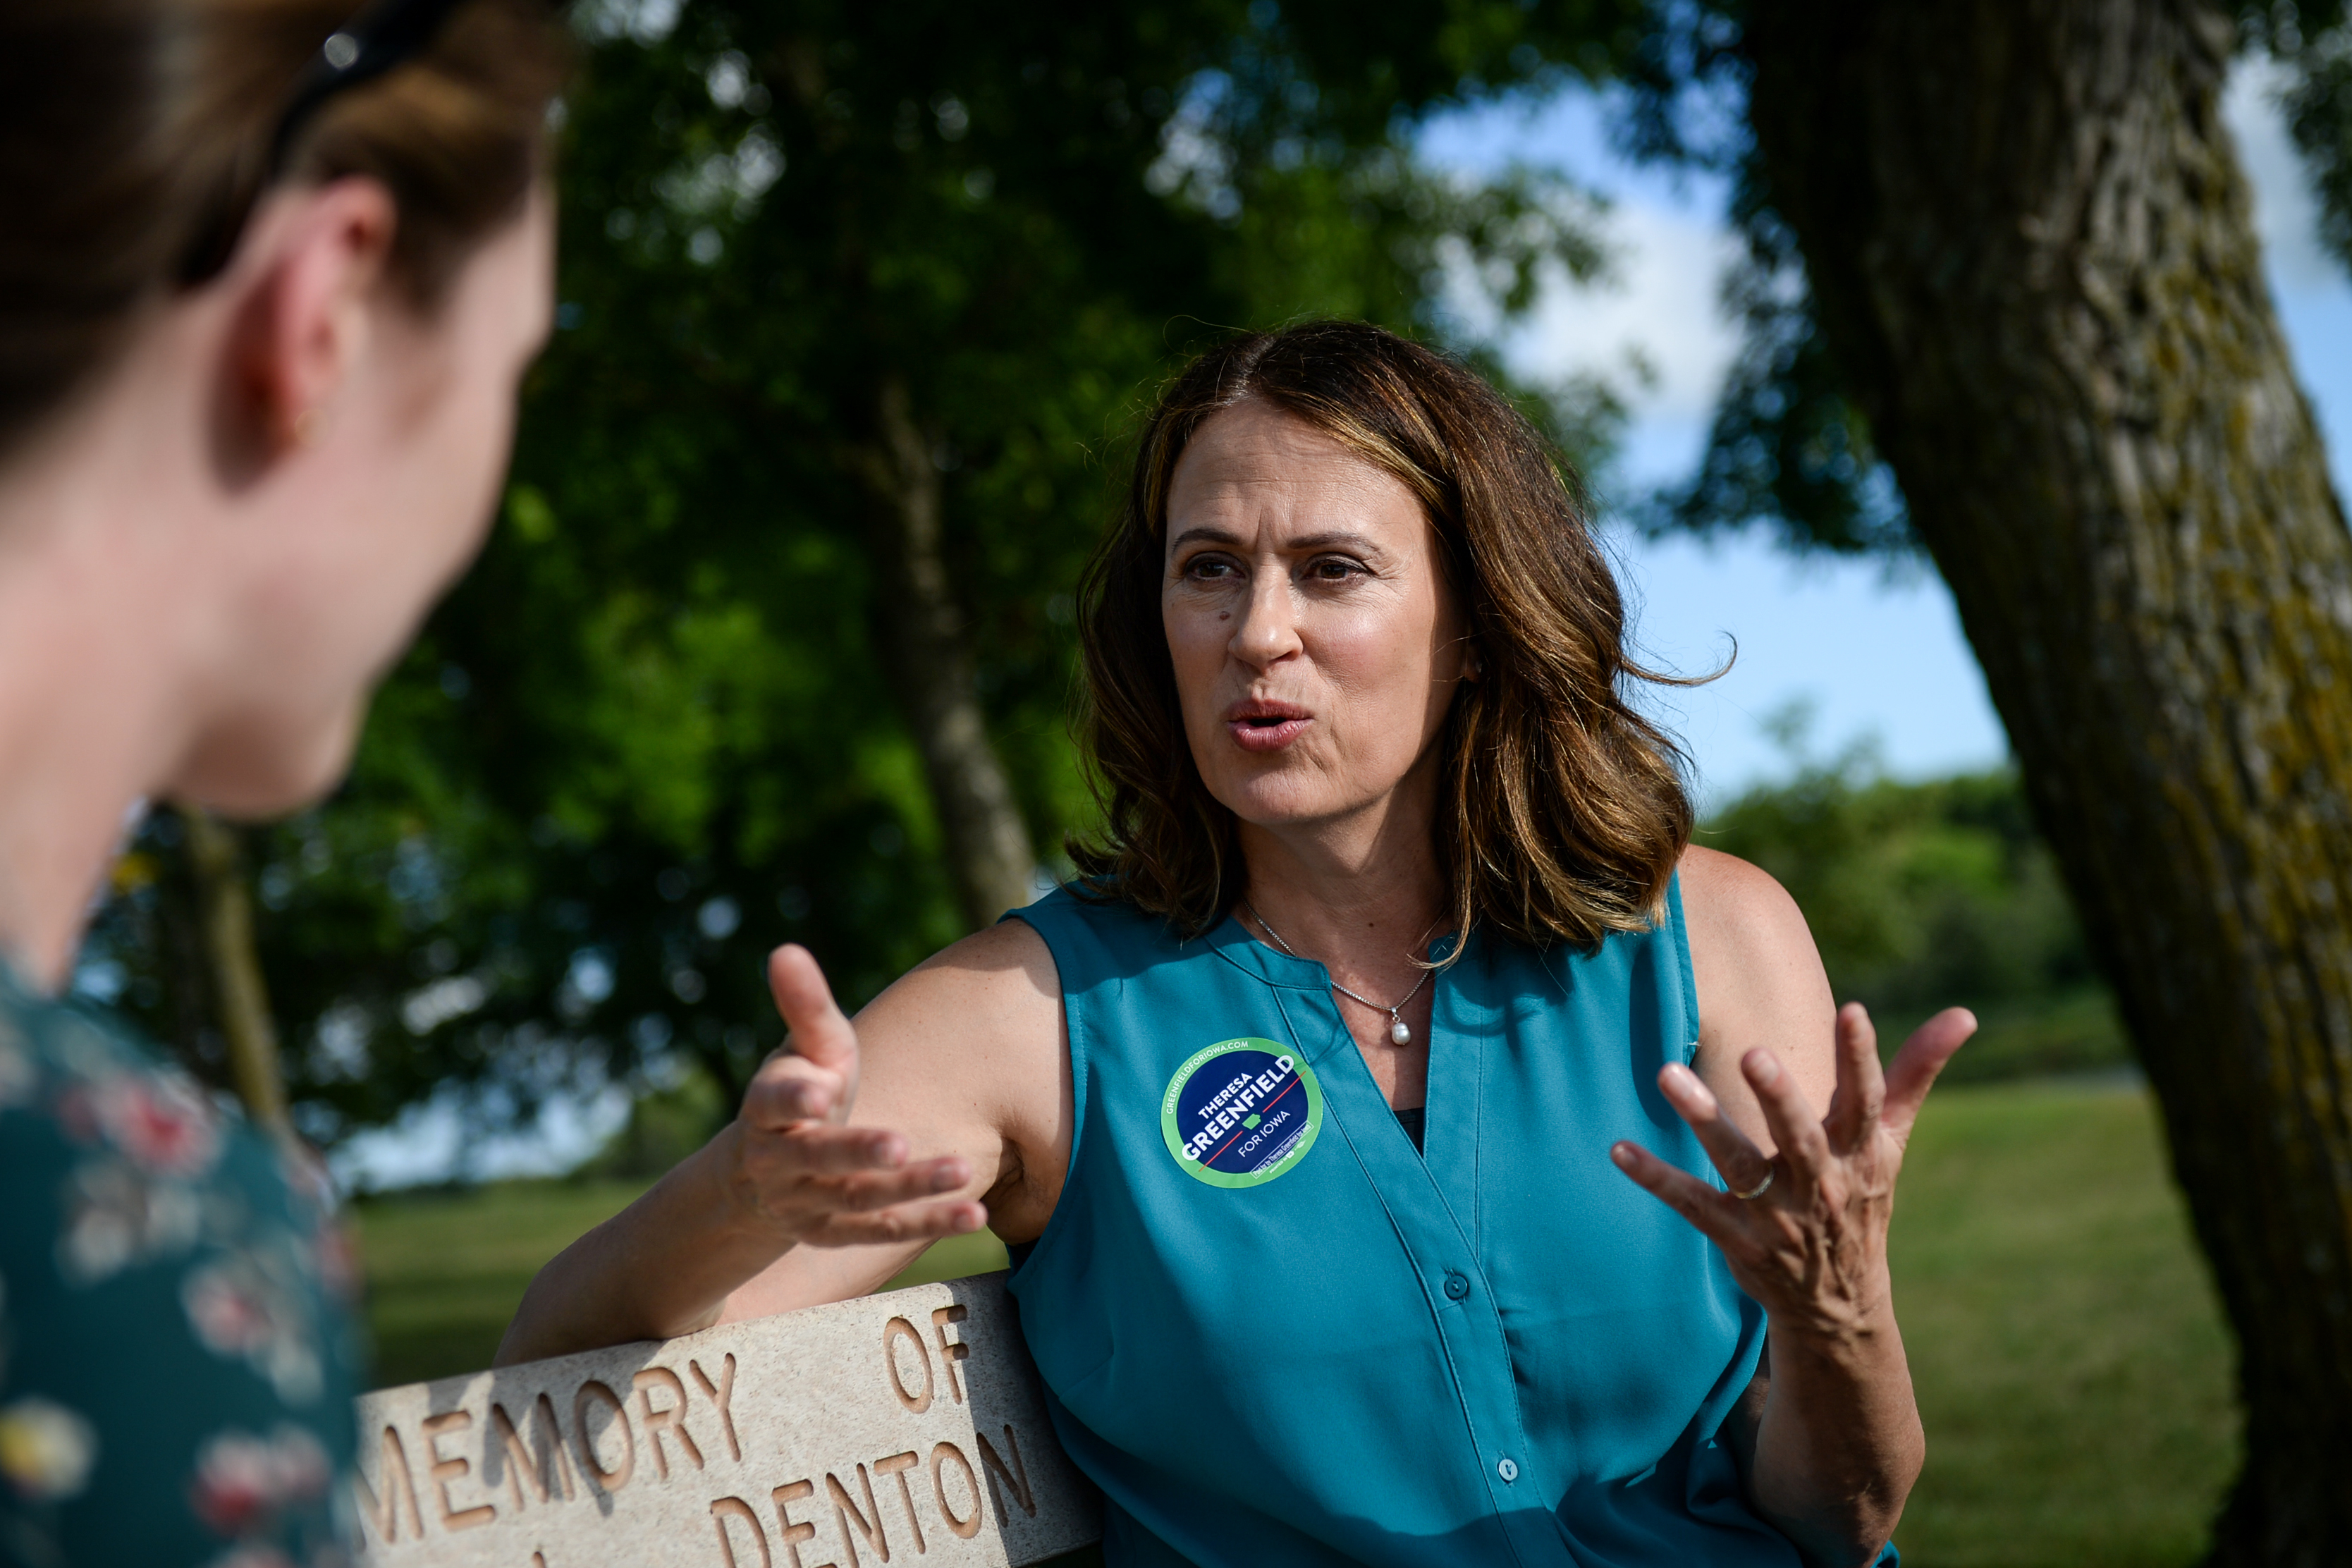 Democratic senate candidate Theresa Greenfield speaks with a reporter at a picnic hosted by the Adair County Democrats in Greenfield, Iowa on Sunday August 11, 2019. (Caroline Brehman—CQ-Roll Call, Inc via Getty Images)